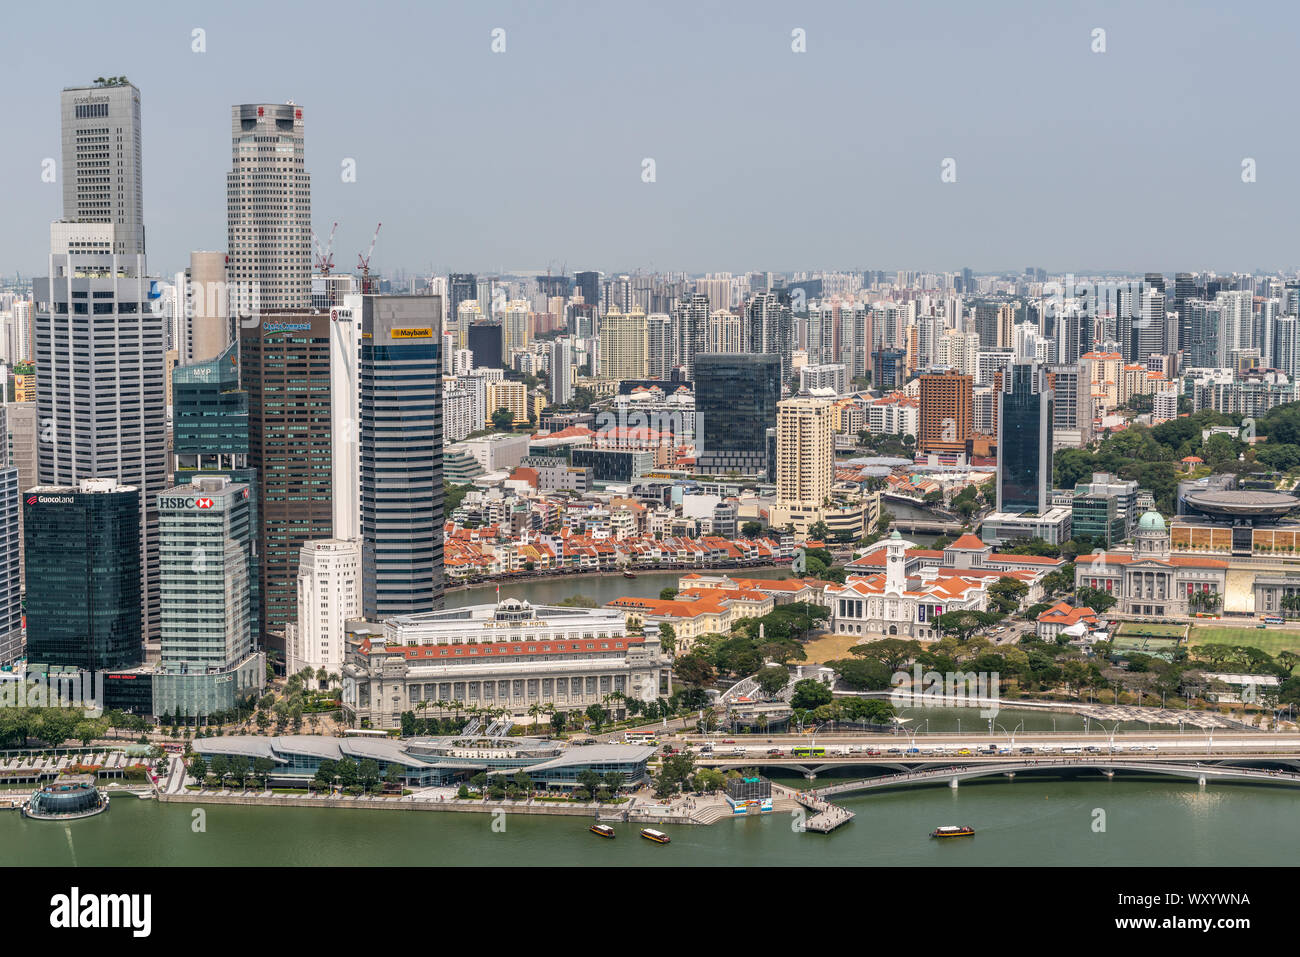 Singapore - March 21, 2019: Shot from Sands roof. Birds eye view Fullerton Hotel with river behind and greenish marina in front. Part of Financial dis Stock Photo